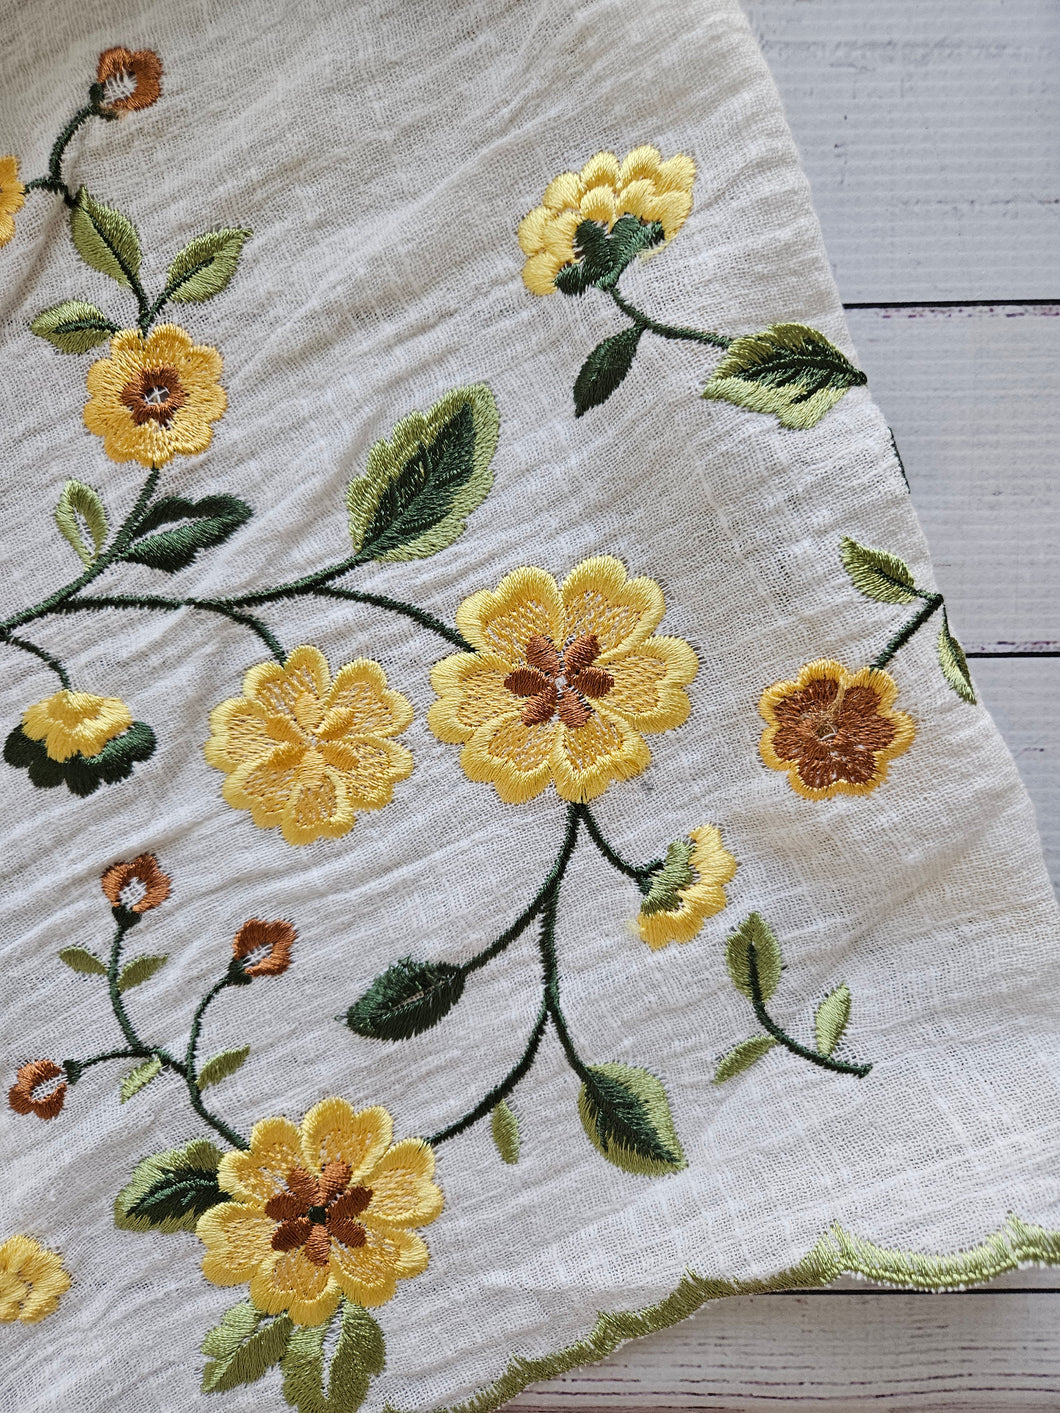 Ivory & Yellow Floral Border Print Rayon Cotton Blend {by the half yard}